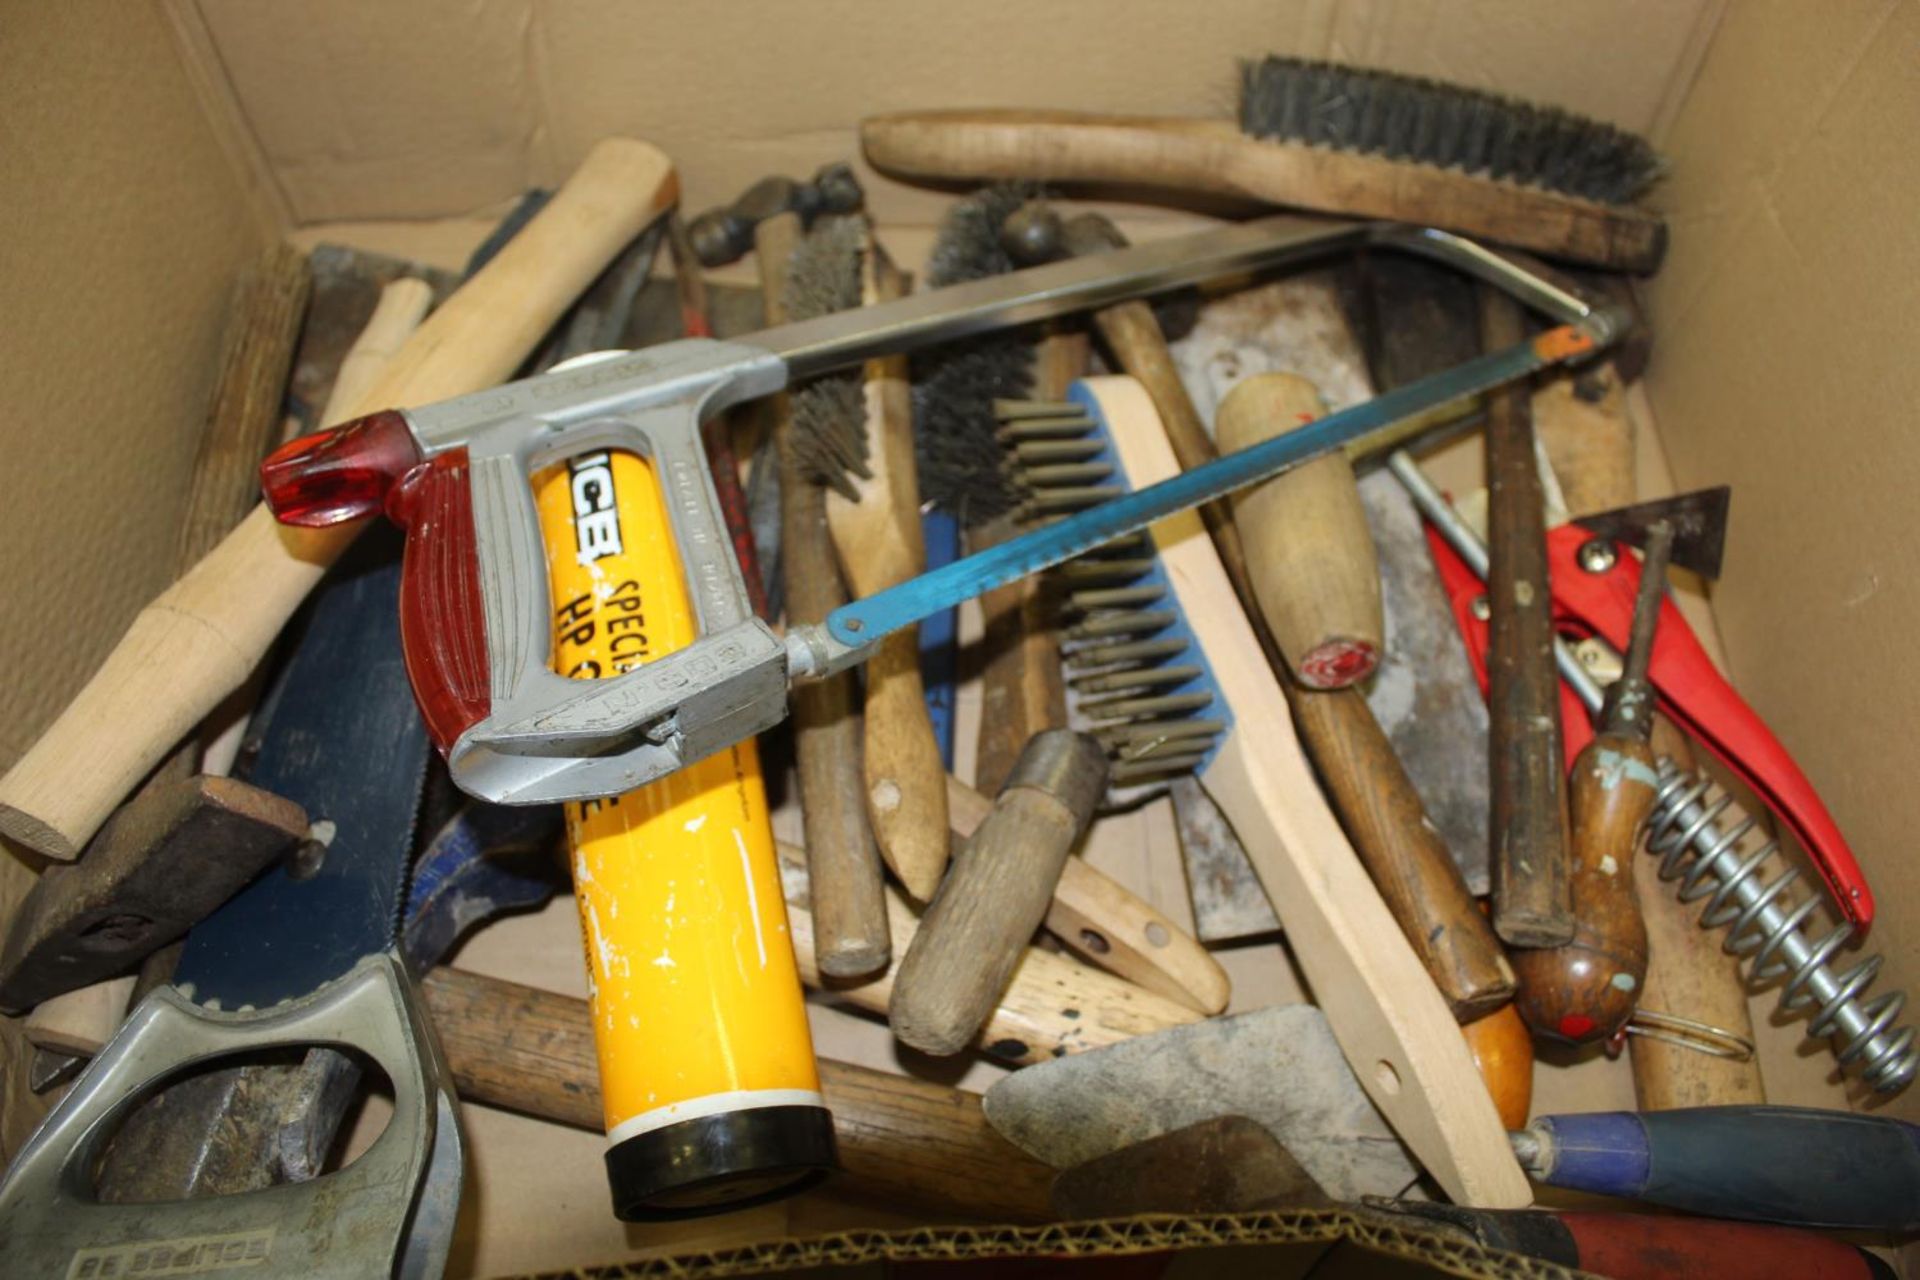 A BOX CONTAINING SAW WIRE BRUSHES, SAWS, GREASE, TROWELS ETC